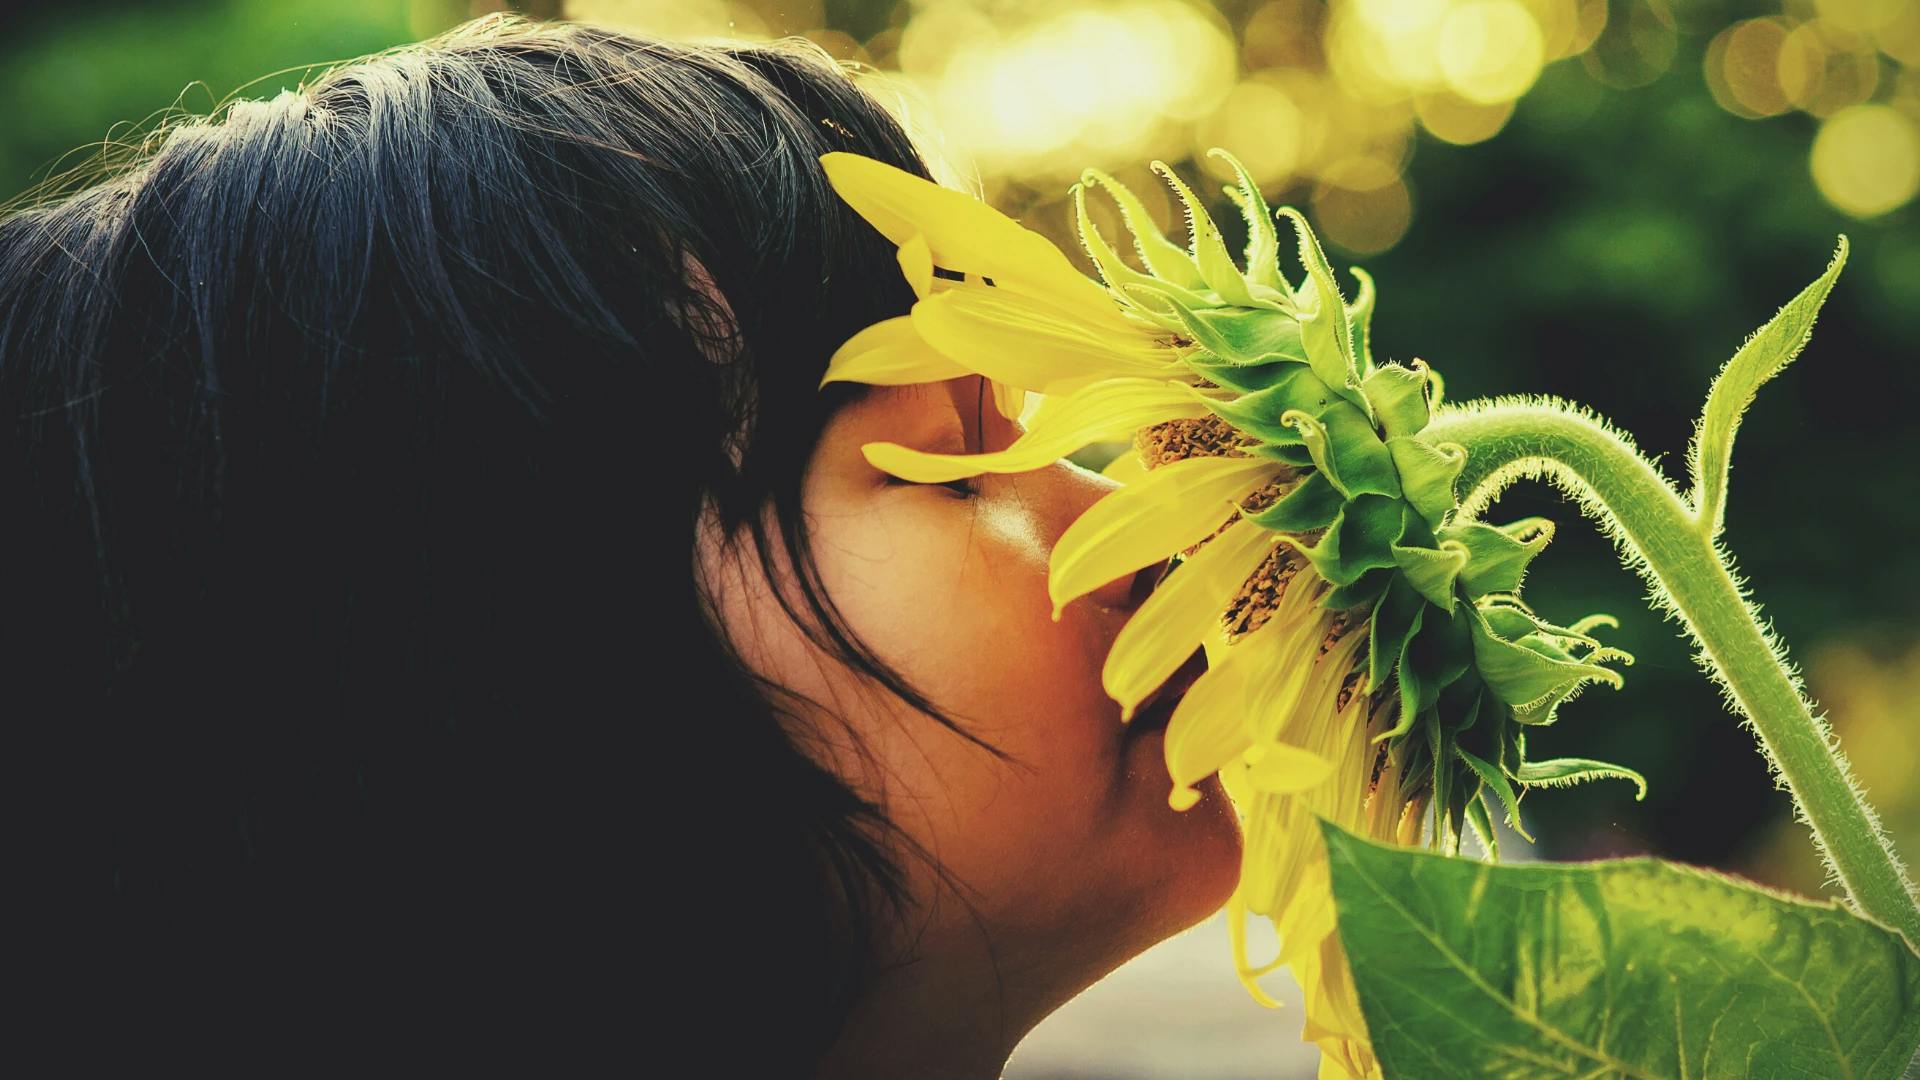 A child smelling a sunflower